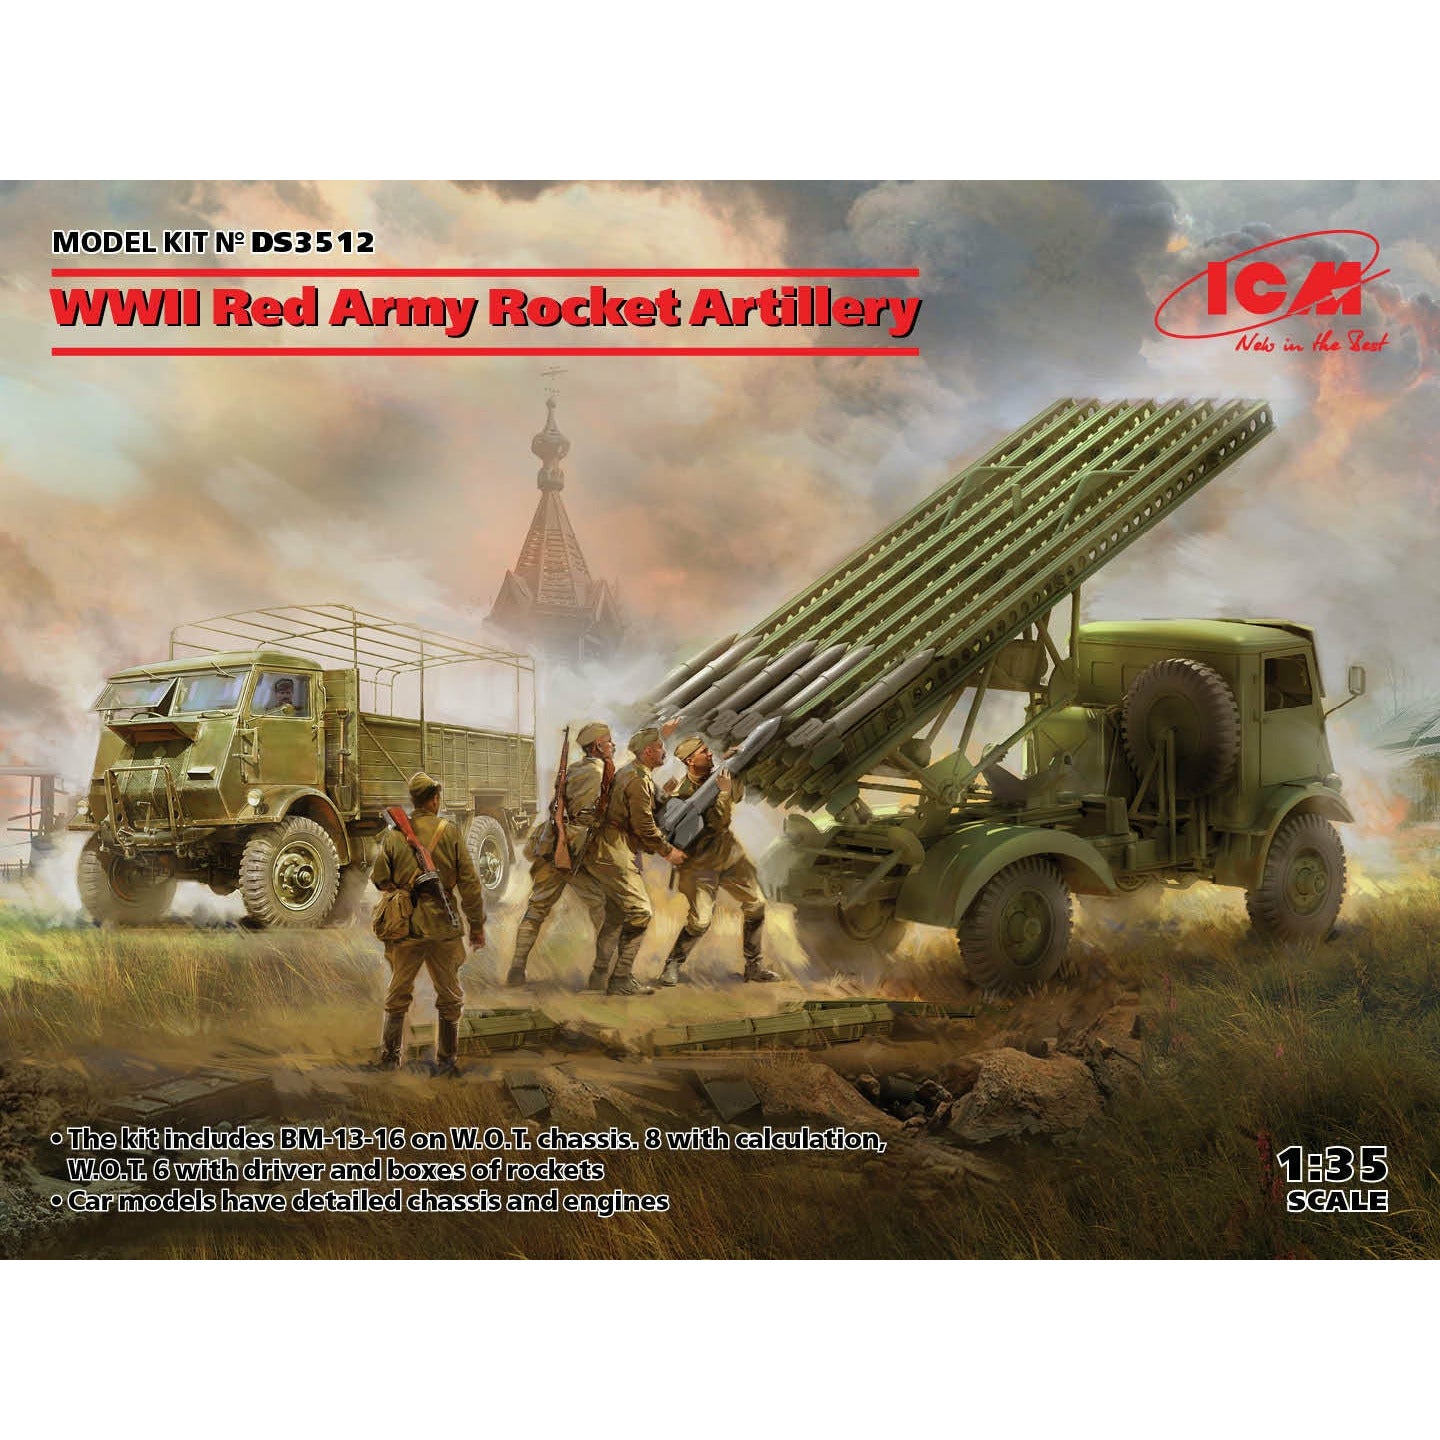 WWII Red Army Rocket Artillery (BM-13-16 on W.O.T. 8 chassis, Model W.O.T. 6, WWII Soviet BM-13-16 MLRS Vehicle Crew, RKKA Drivers (1943-1945)) 1/35 #DS3512 by ICM